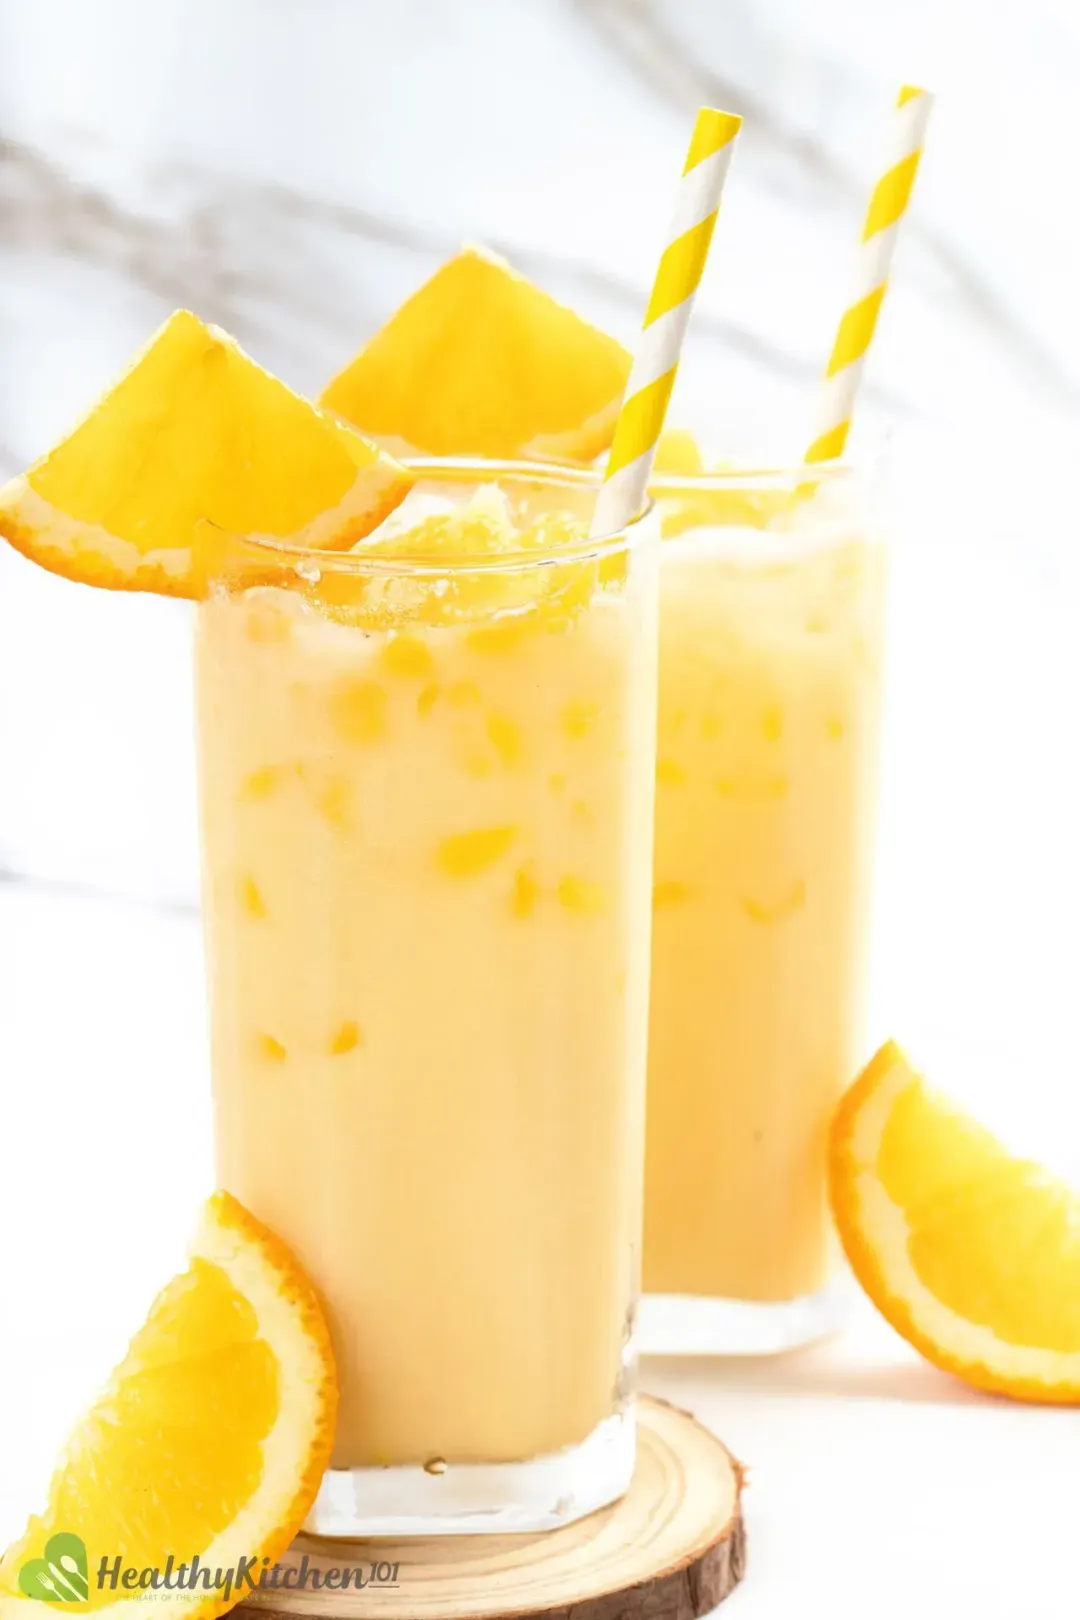 Two tall glasses full of orange juice and milk drink, full of ice, and garnished with orange wedges